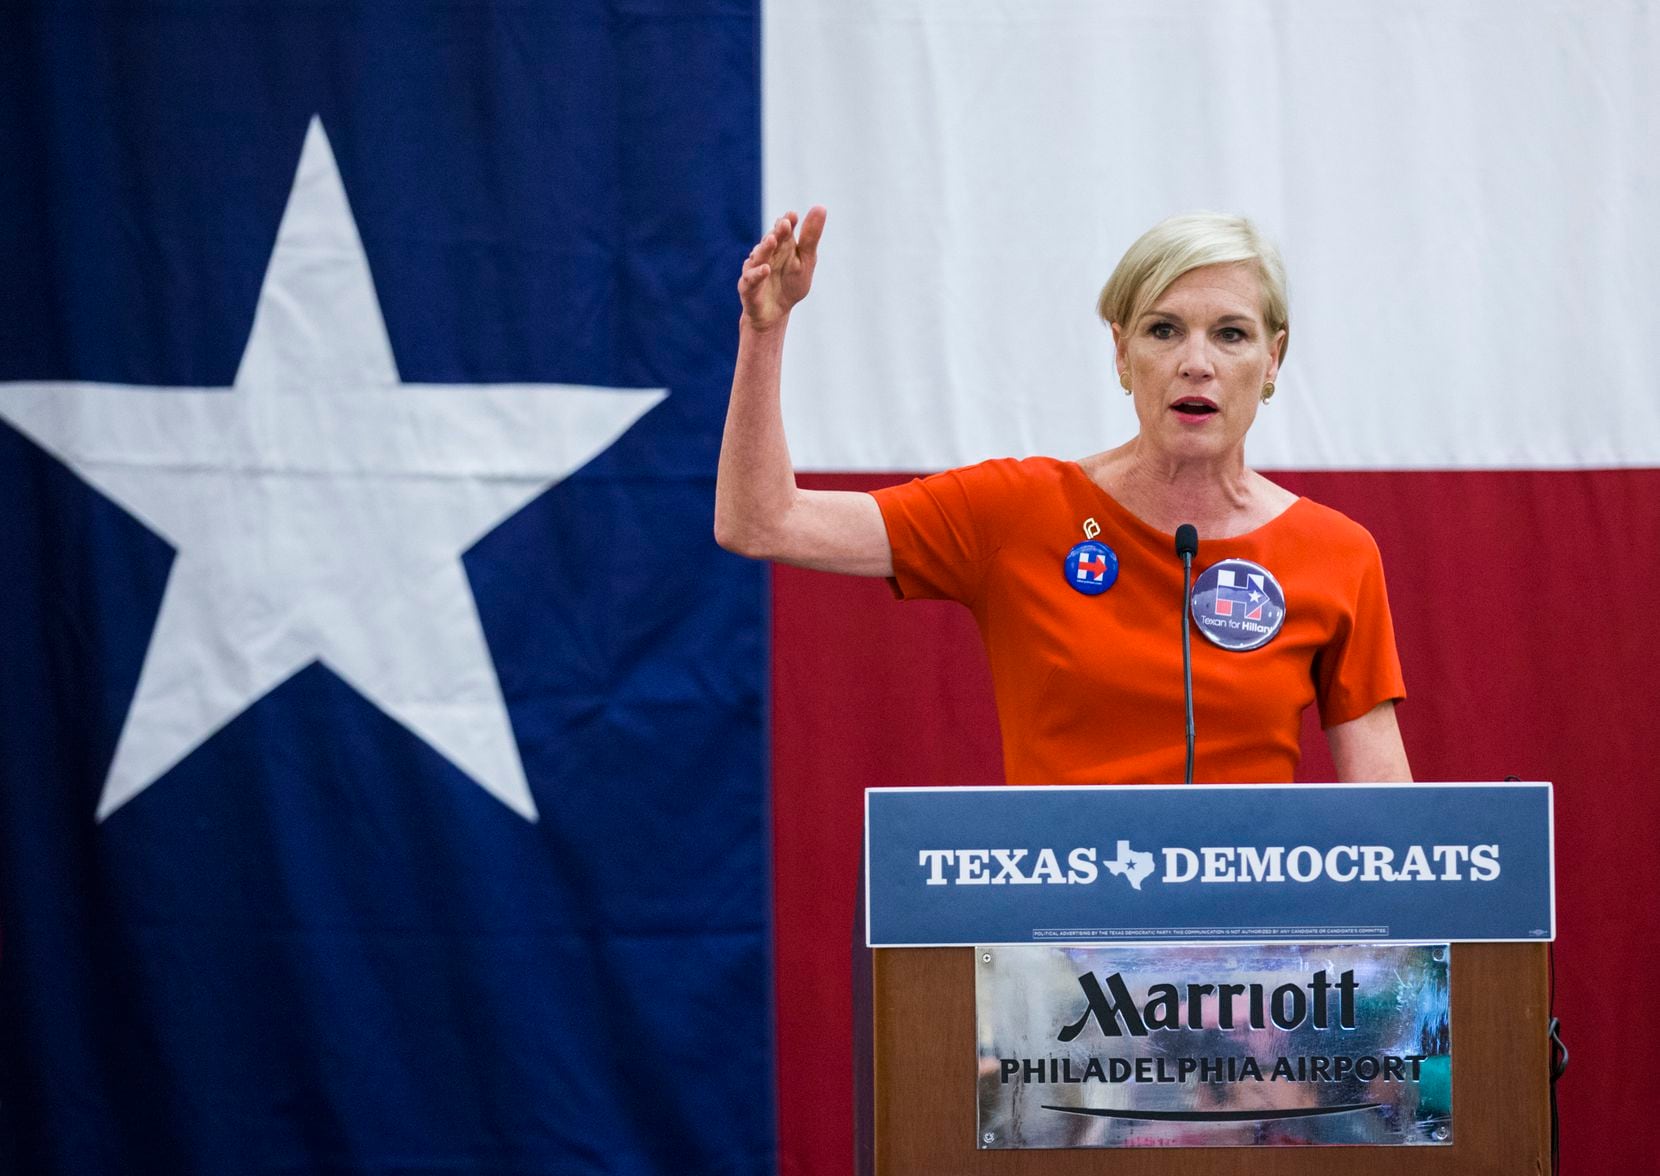 Cecile Richards, daughter of former Texas Gov. Ann Richards, headed Planned Parenthood from 2006 to 2018. Last year, she founded a women's political action group for this year's election.